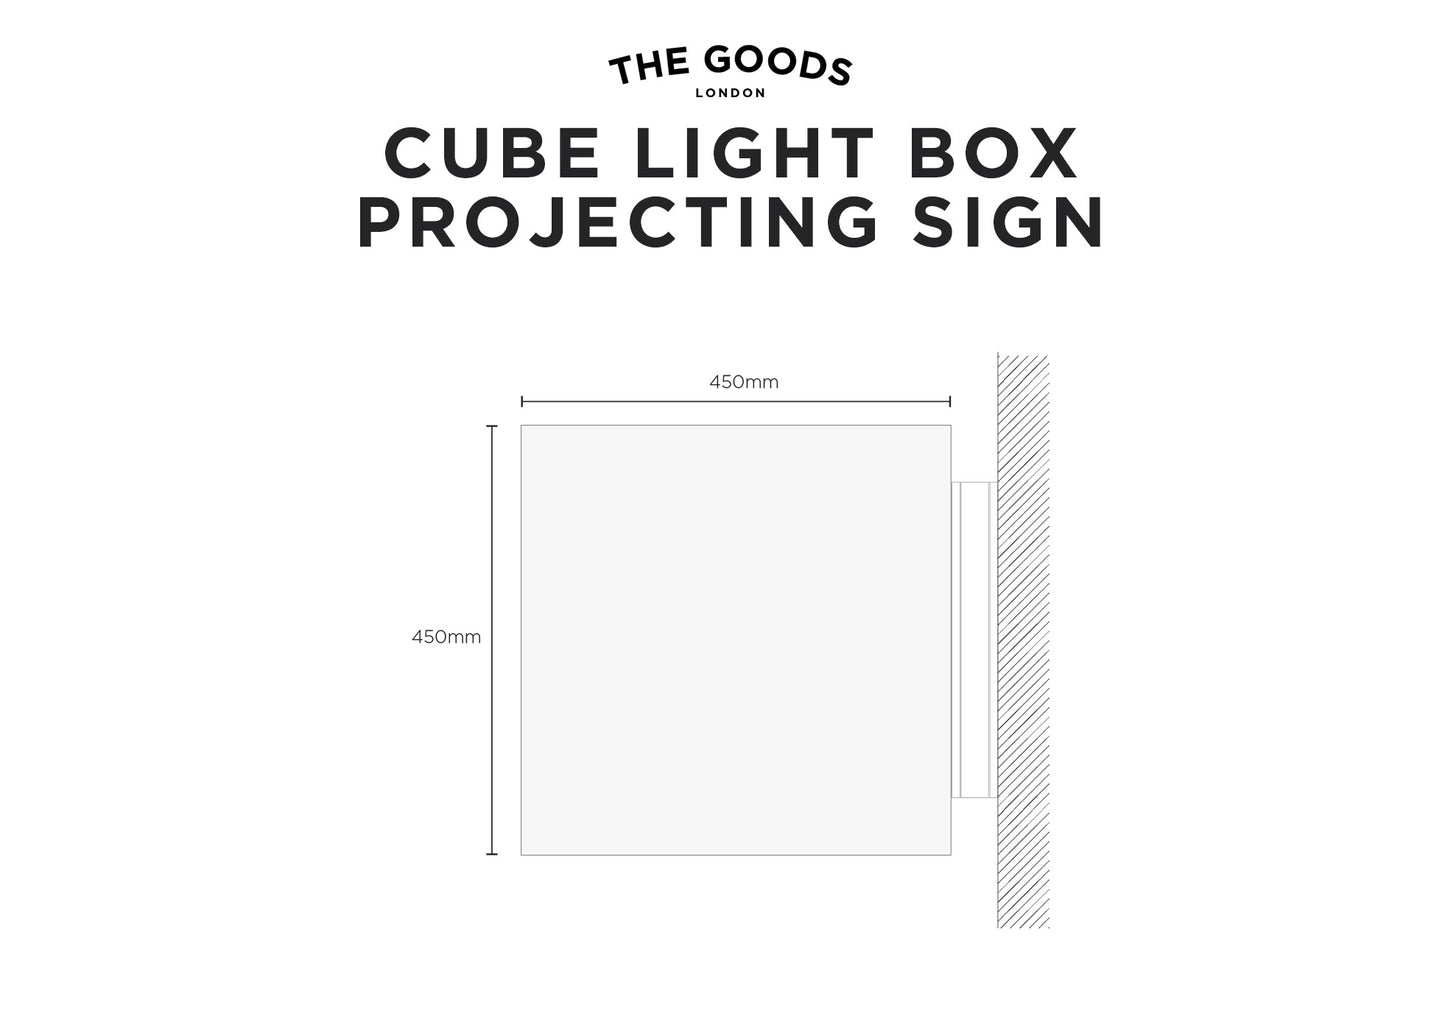 Cube Projecting Light Box Technical Drawing